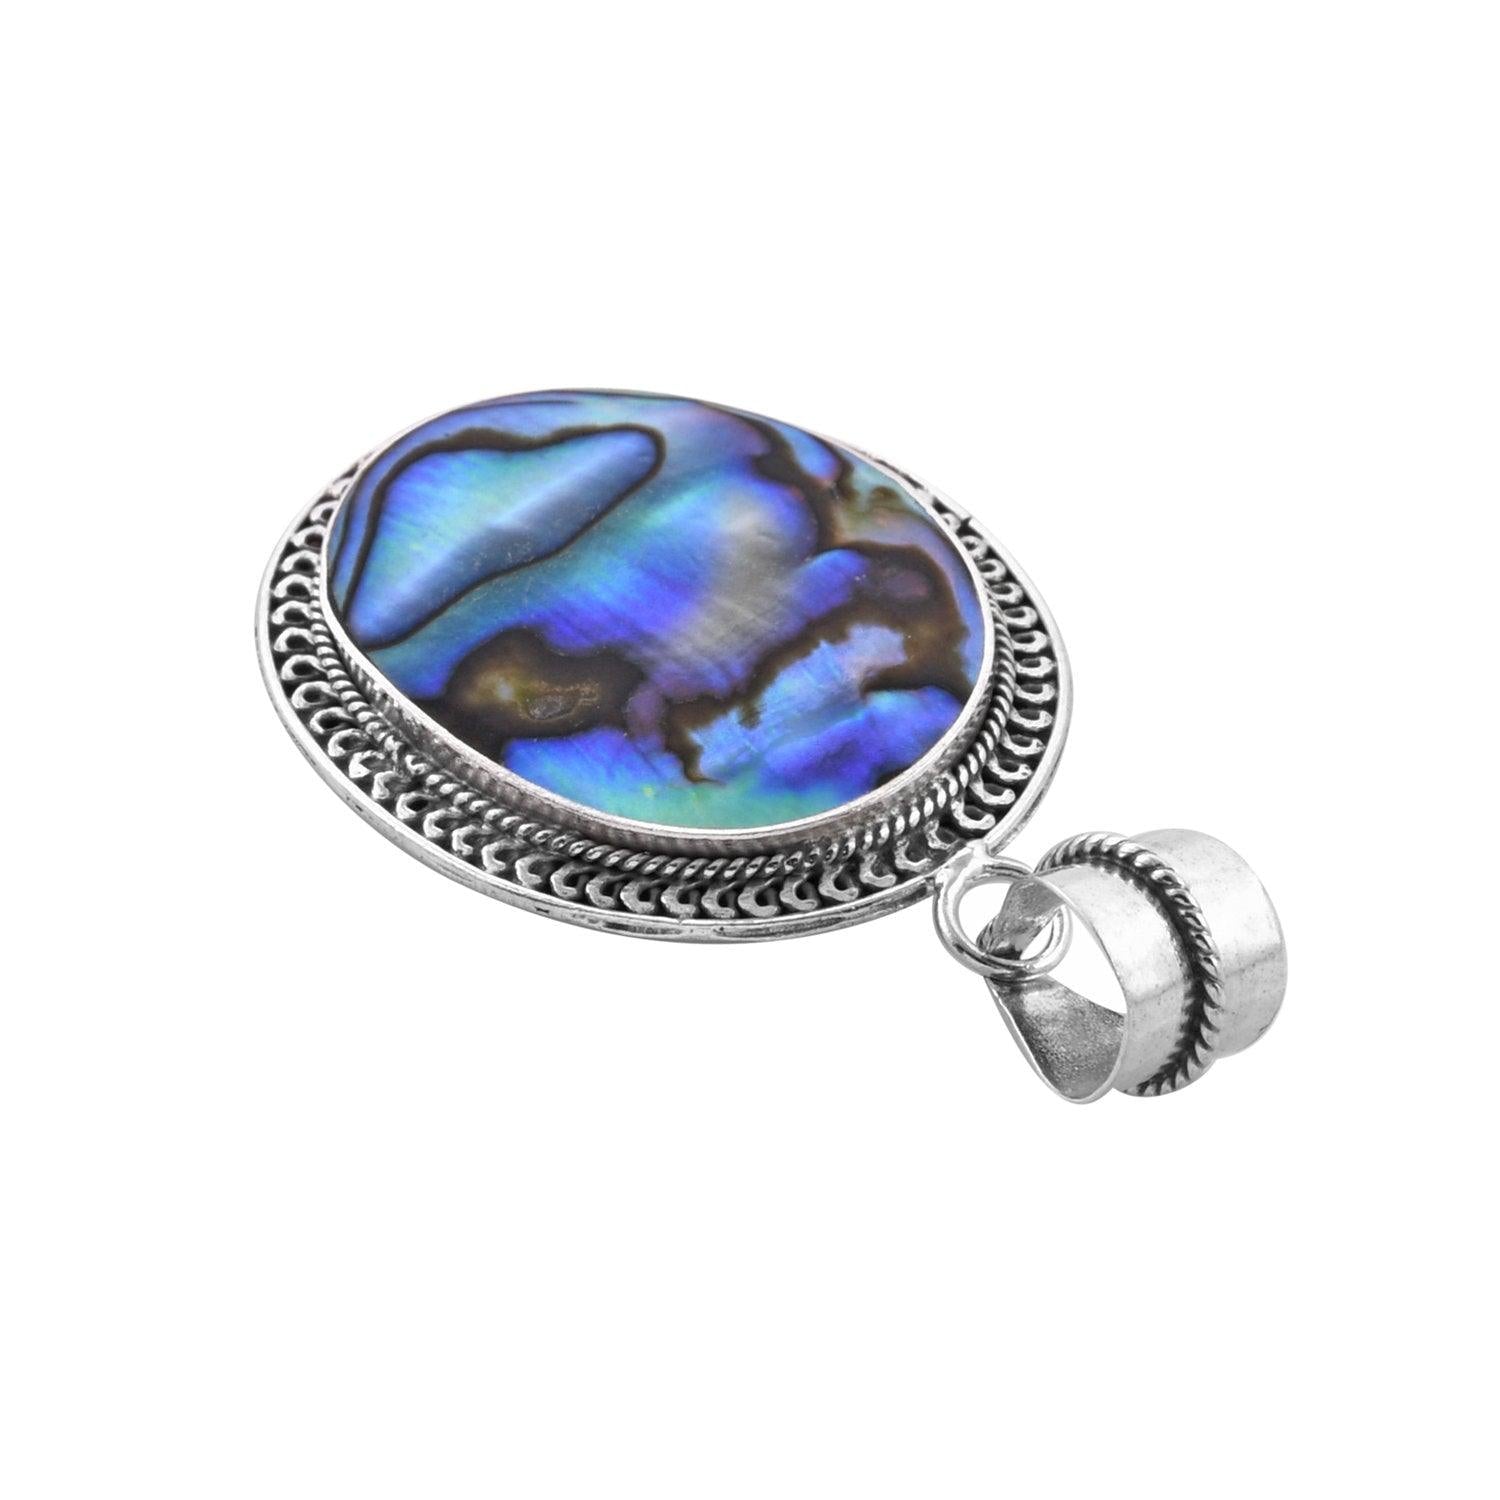 ABALONE PAUA Shell Oval Pendant in 925 Sterling Silver - Inspiring Jewellery